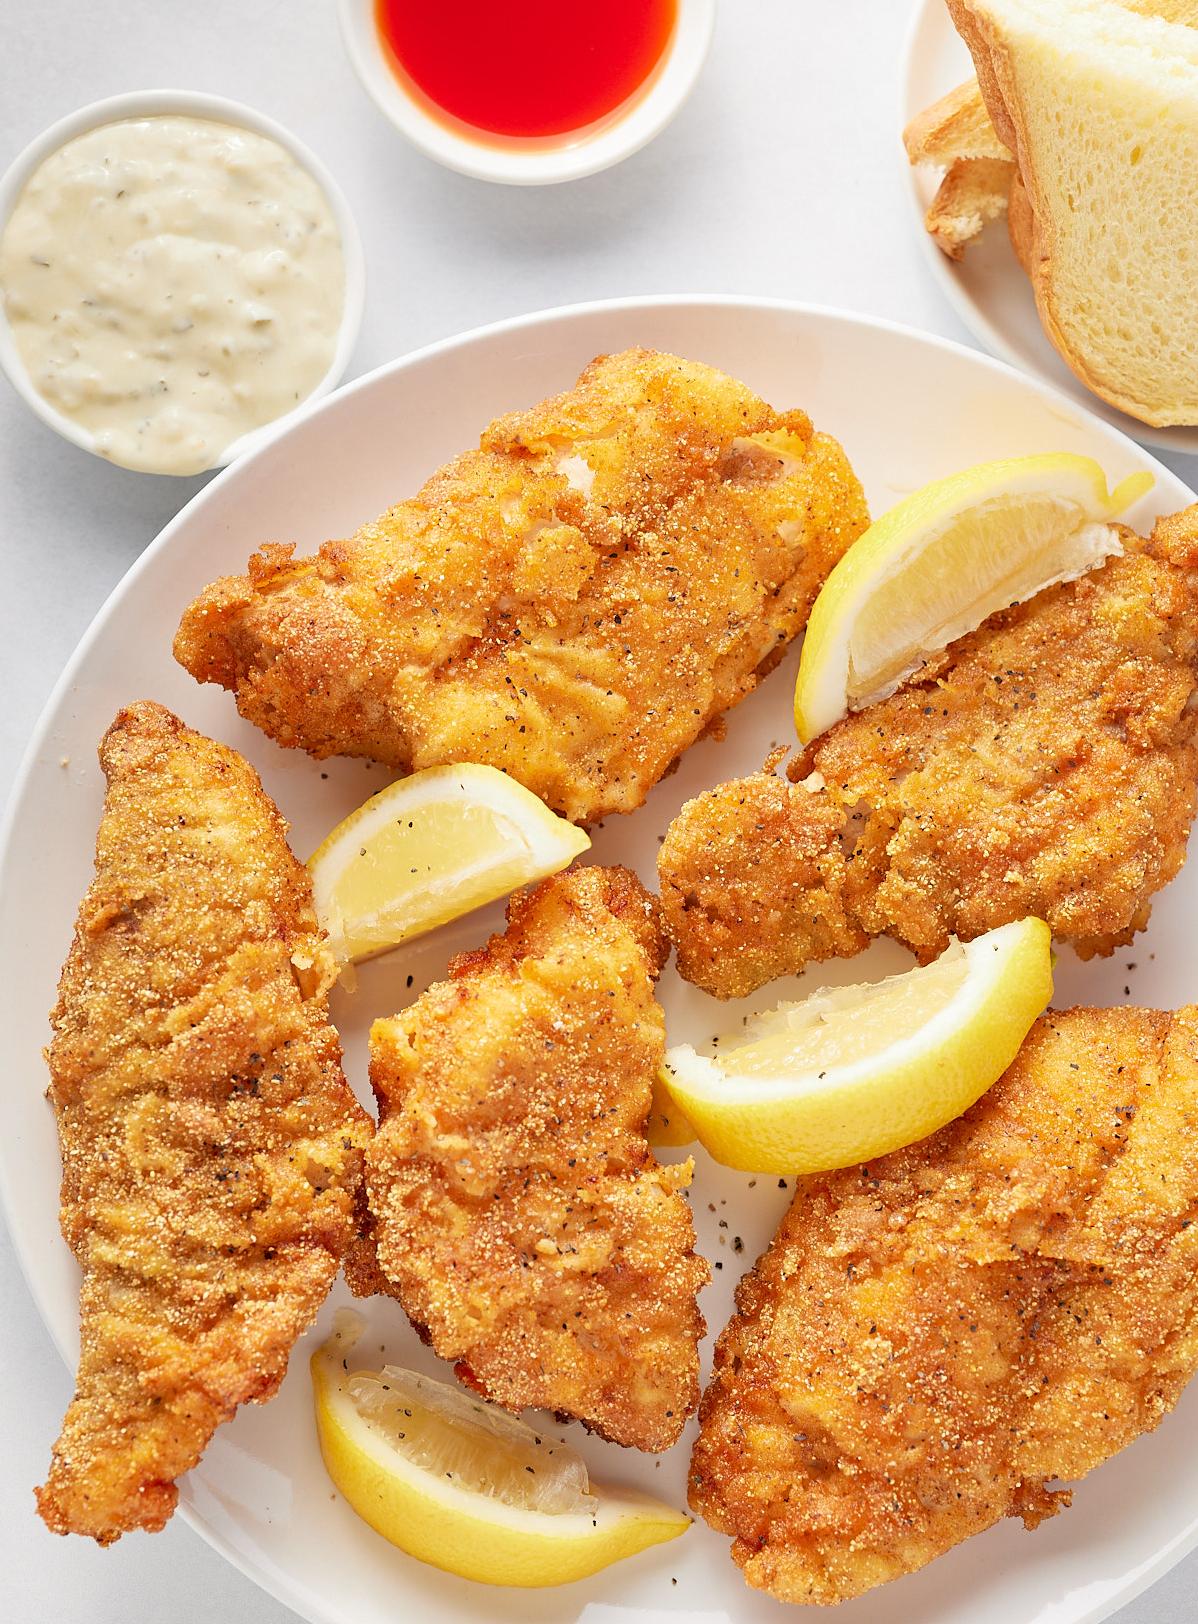  Golden brown and crispy fried catfish, Southern-style.